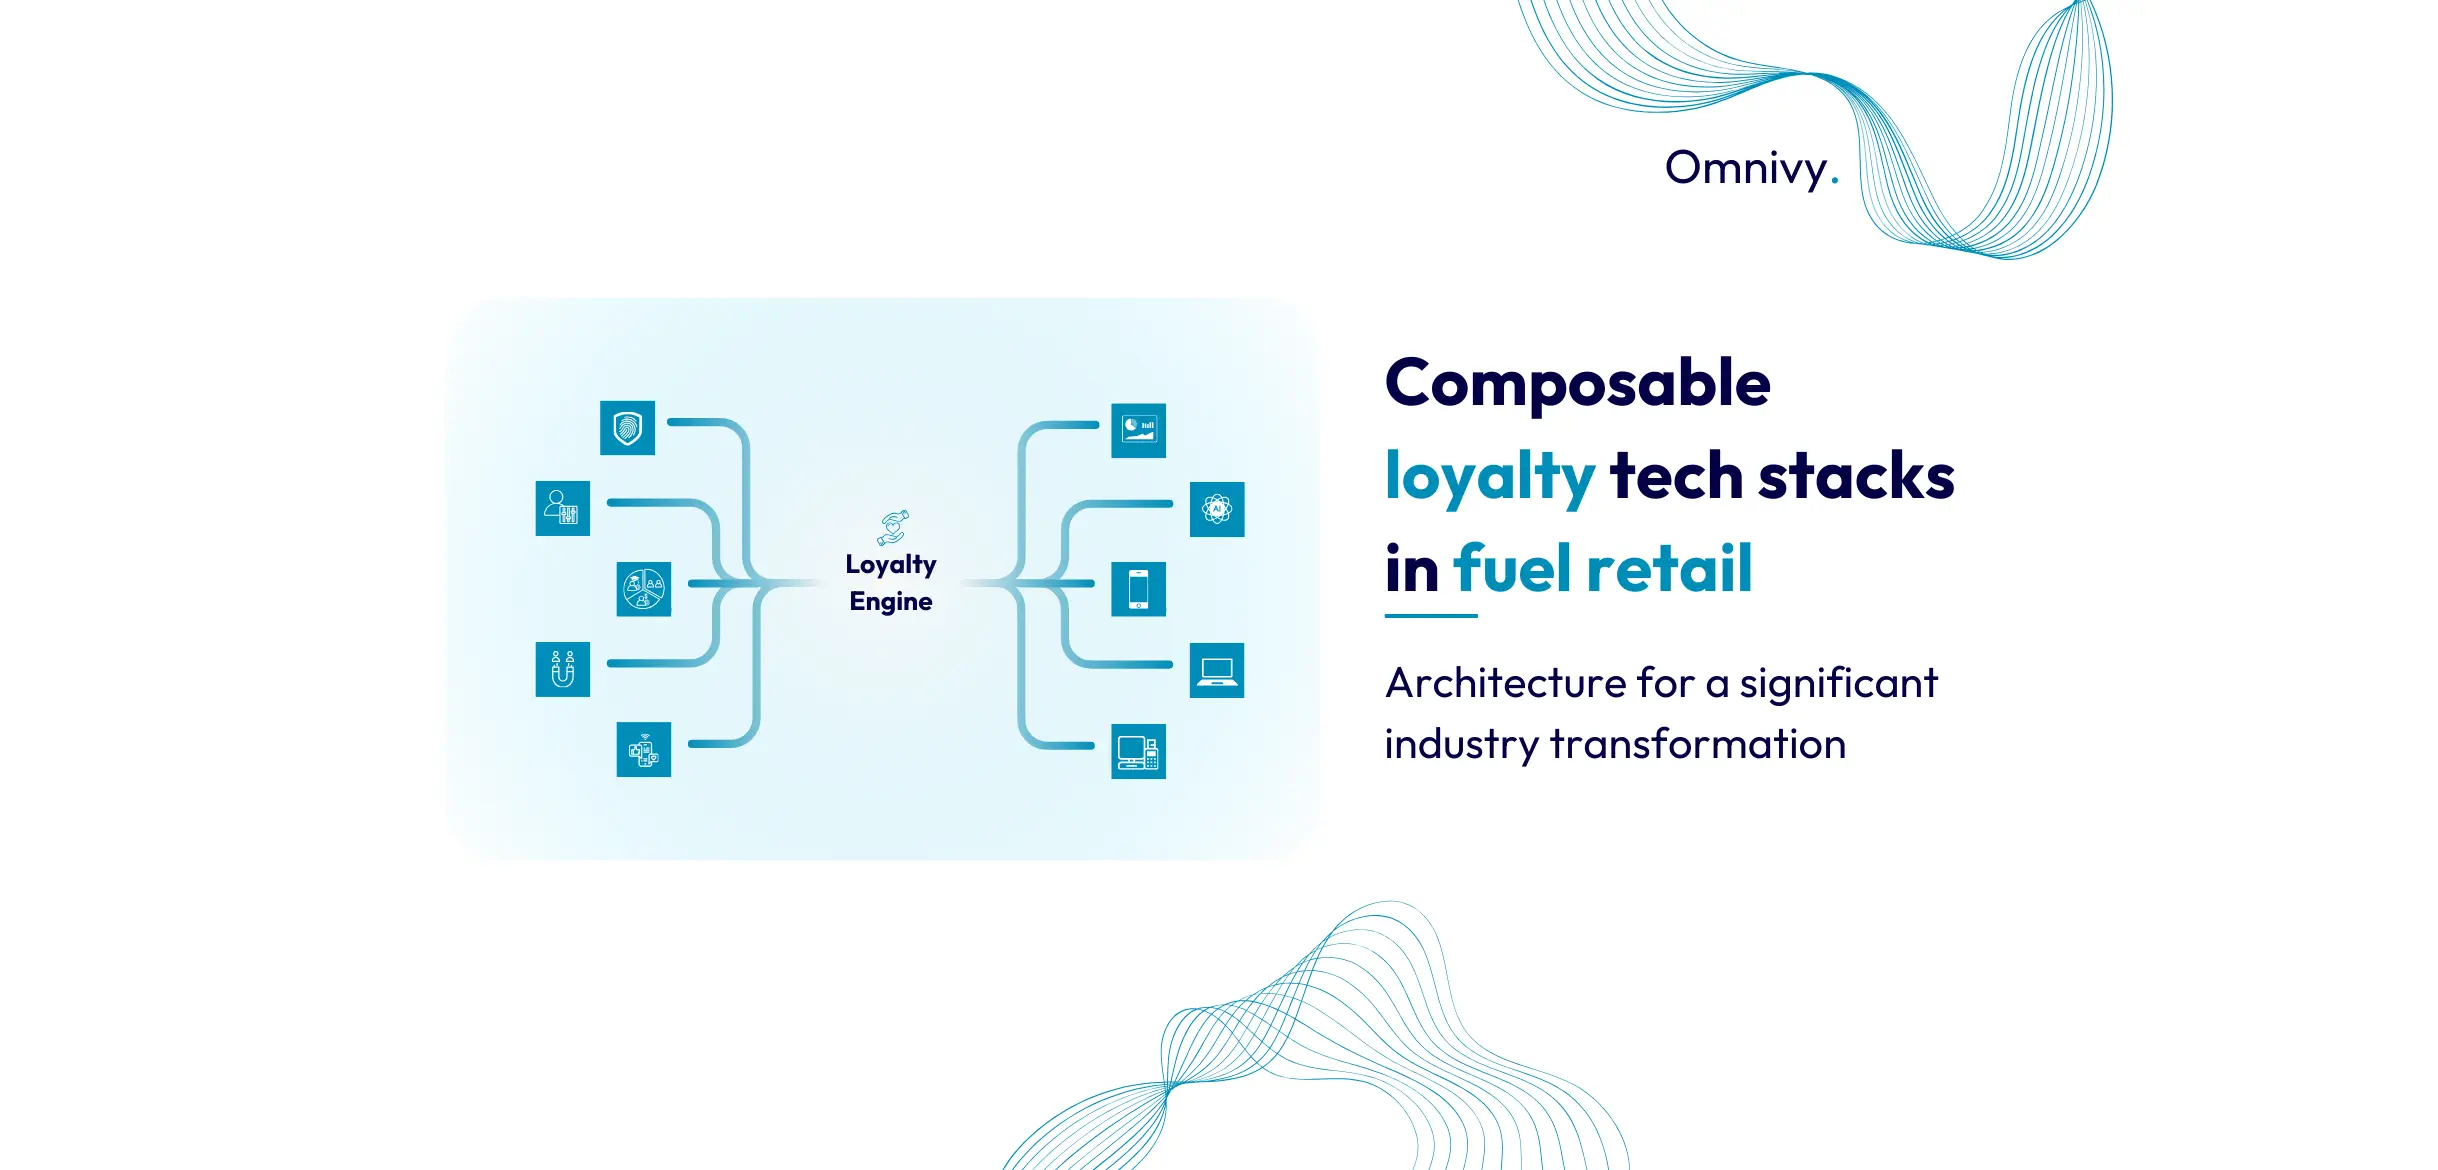 The Rise of Composable Loyalty Tech Stacks in Fuel Retail